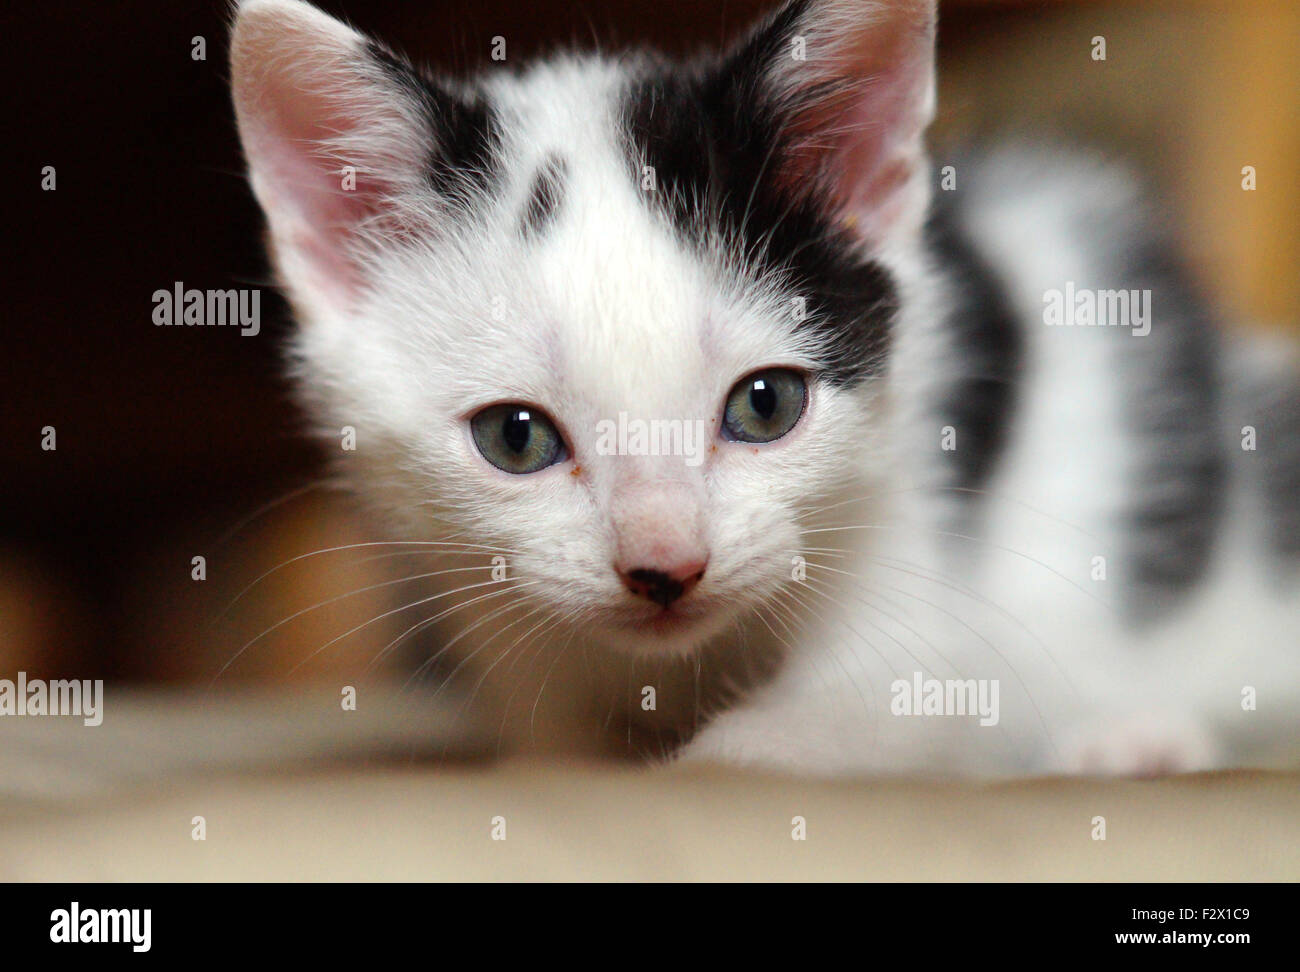 Cute White and Black Kitten with green eyes Close up of face Stock Photo